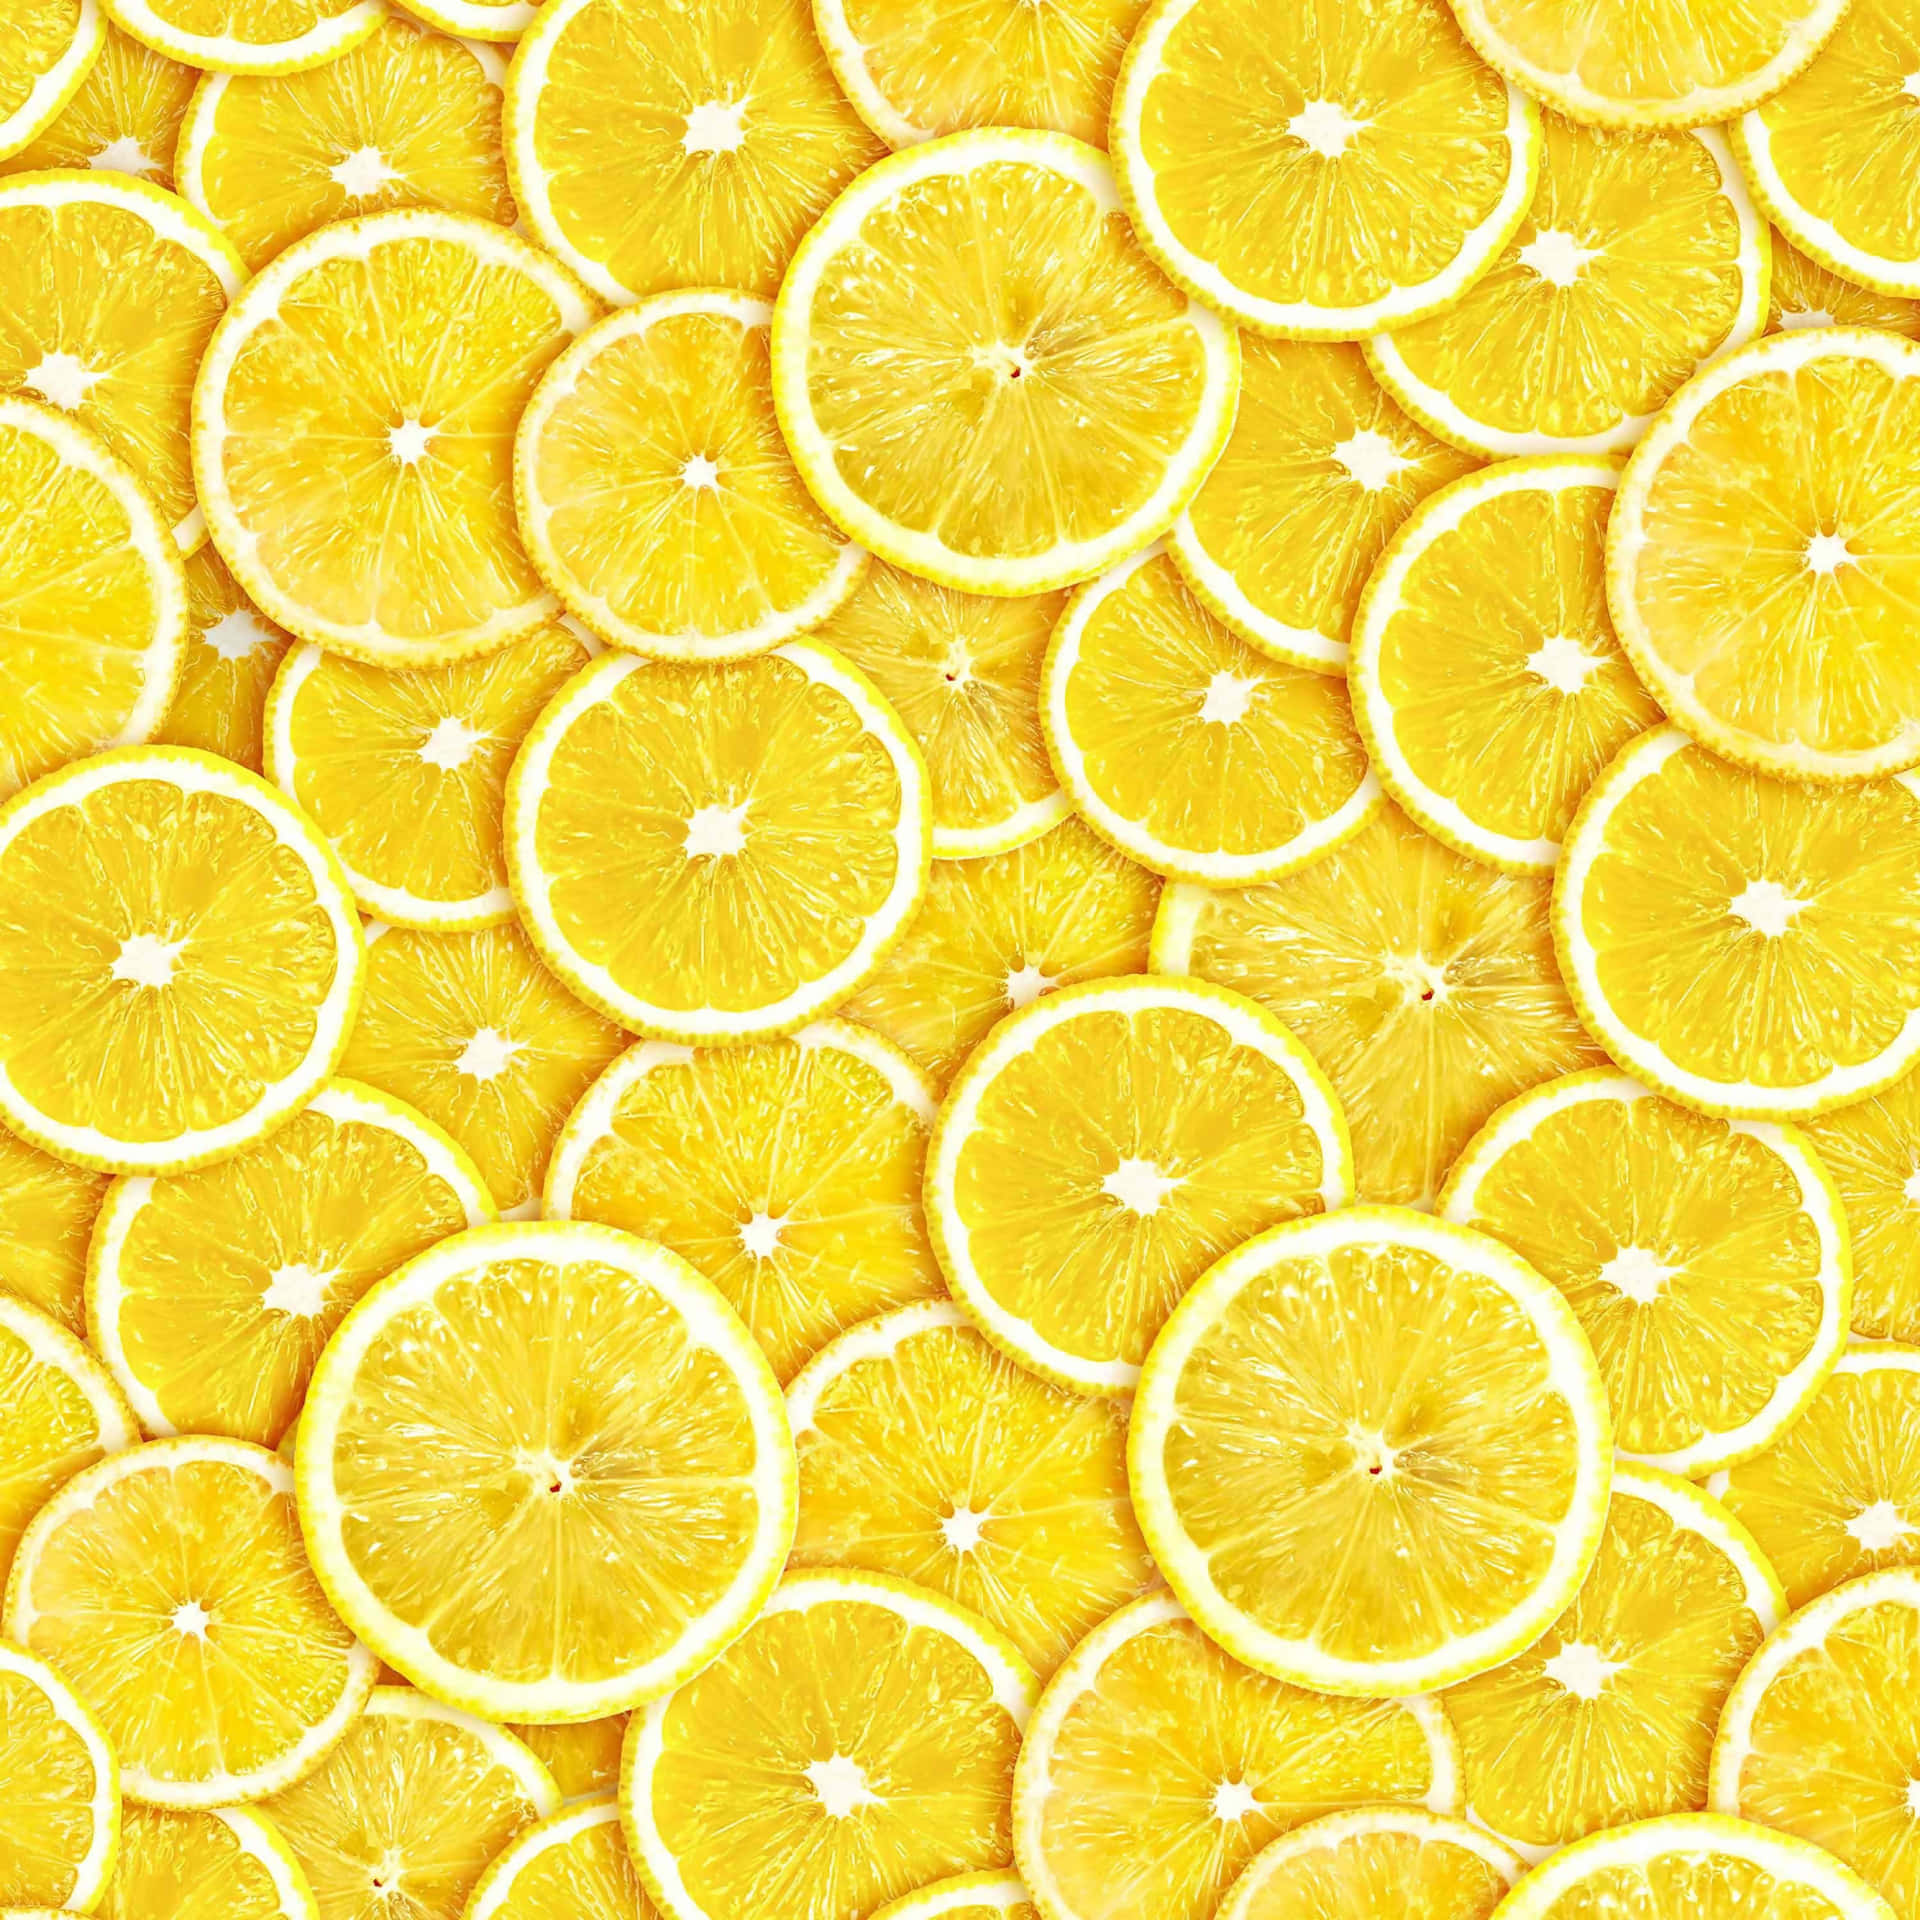 Refresh your device with a Lemon IPhone Wallpaper